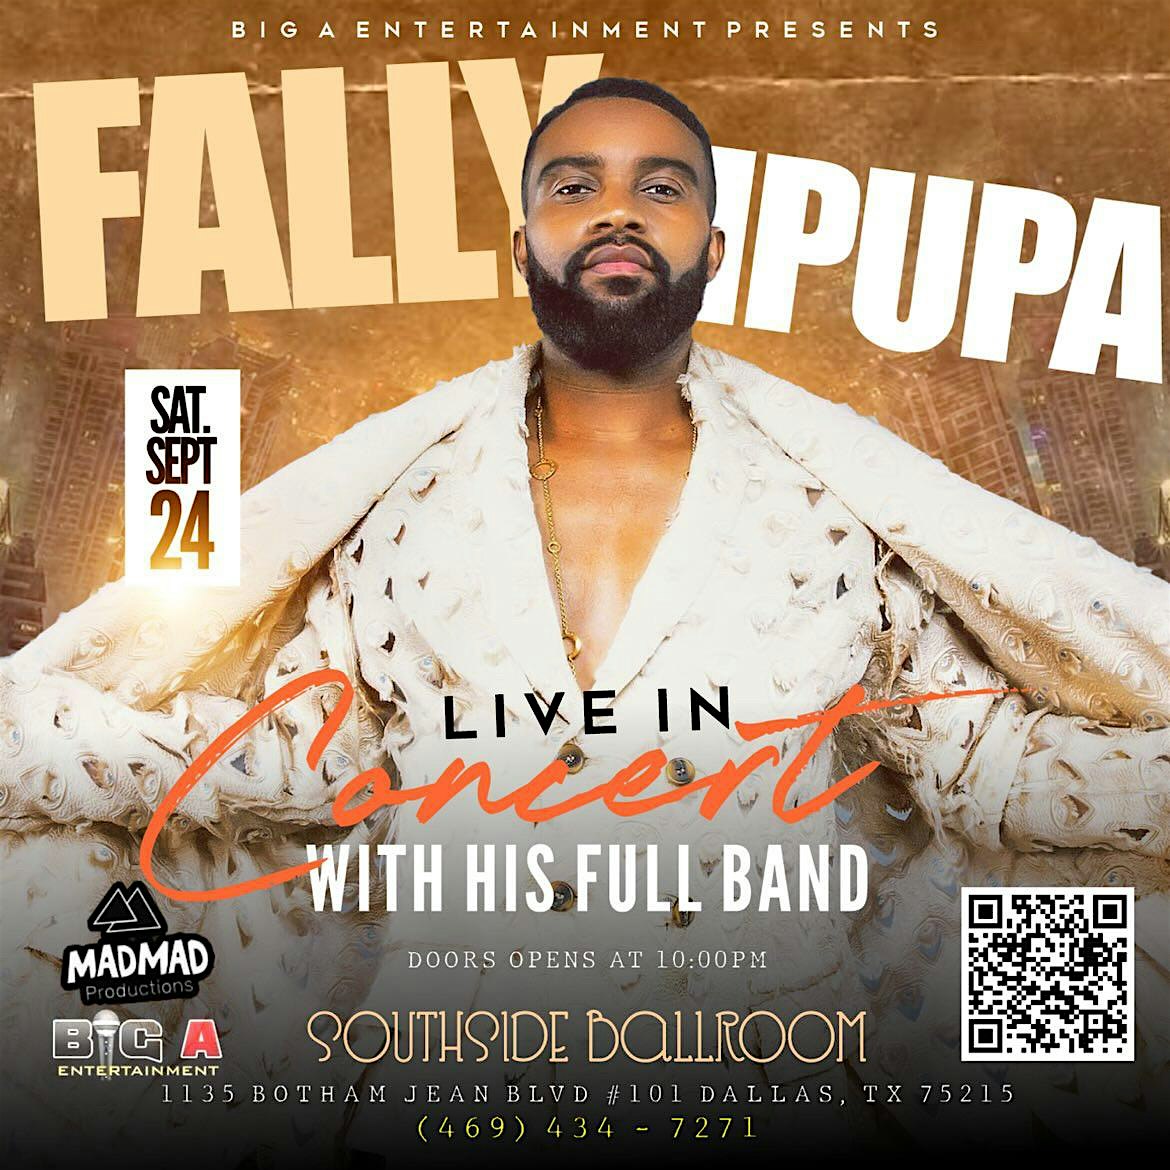 Fally Ipupa live in Concert with his Band in Dallas